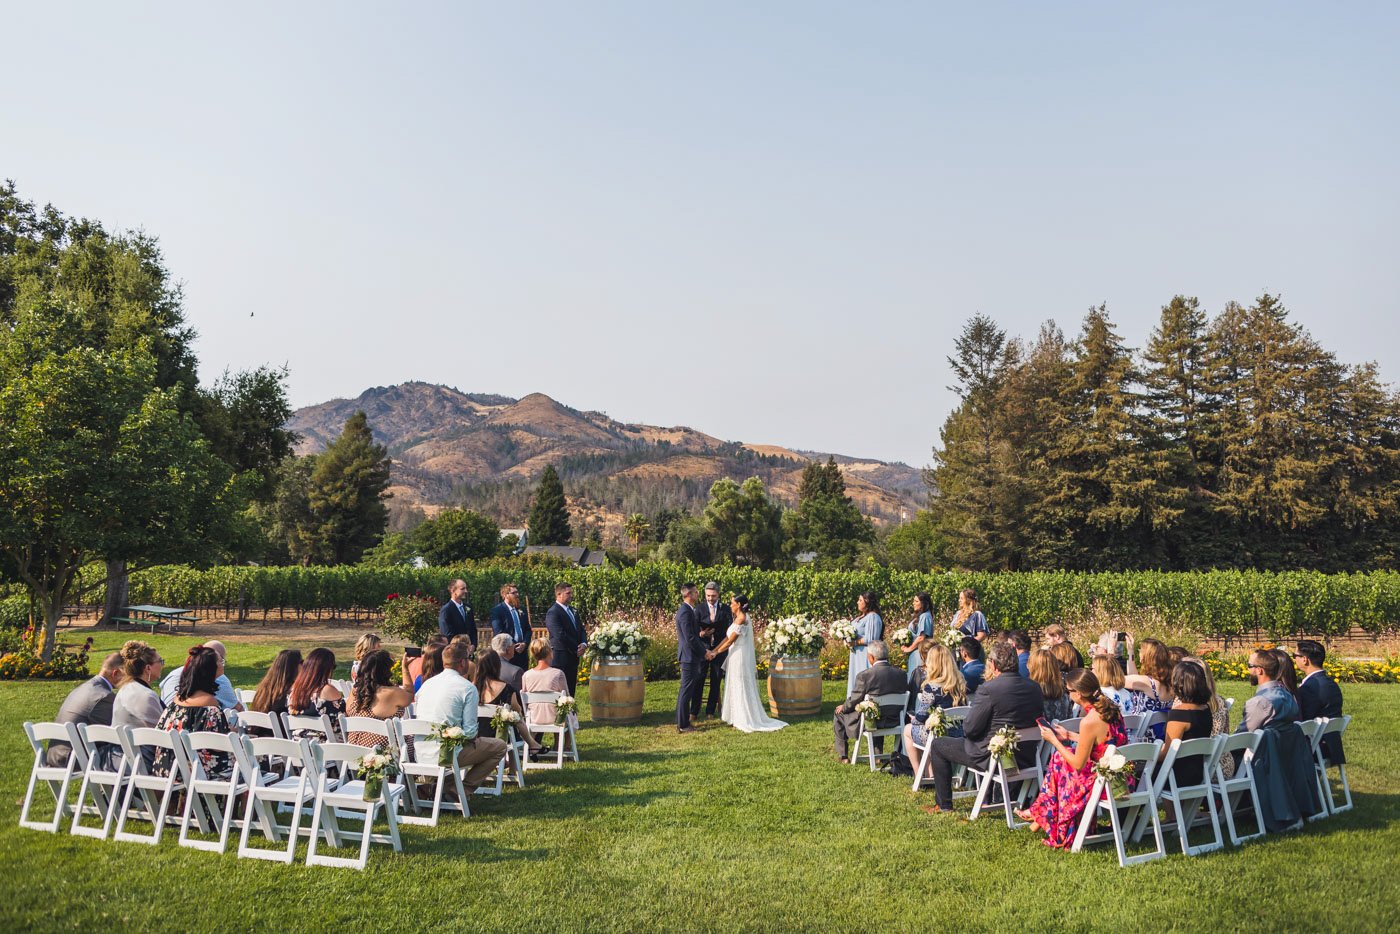 wedding ceremony in front of vineyards and mountain backdrop